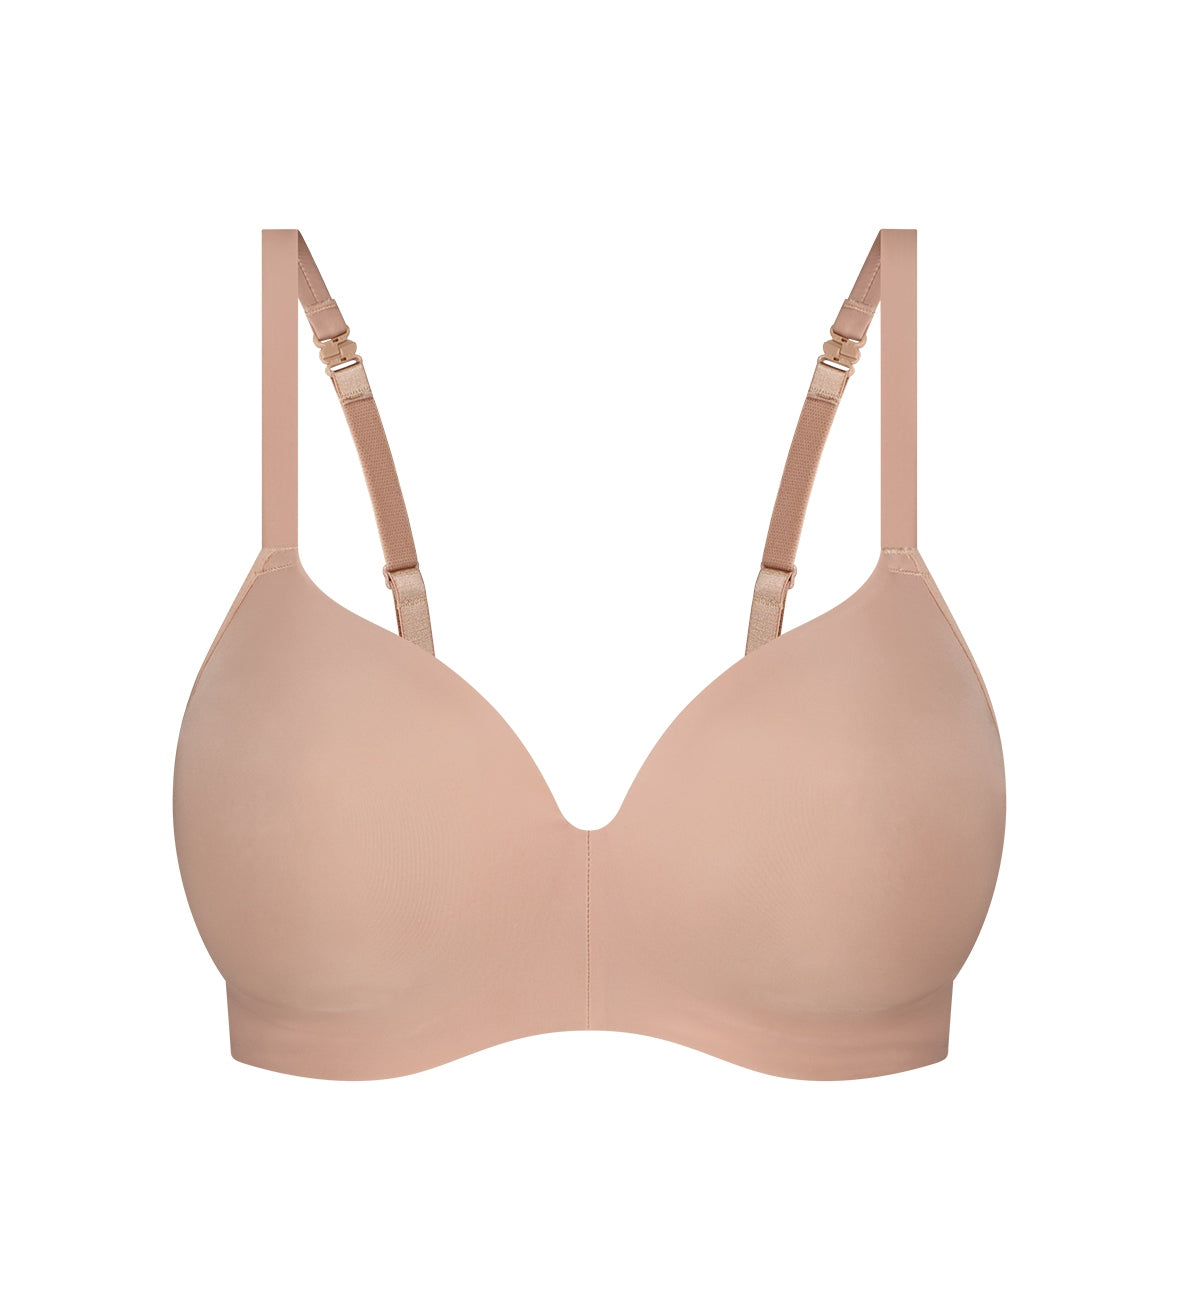 Wired Bra with Soft Shells Smoothie Soul, nude